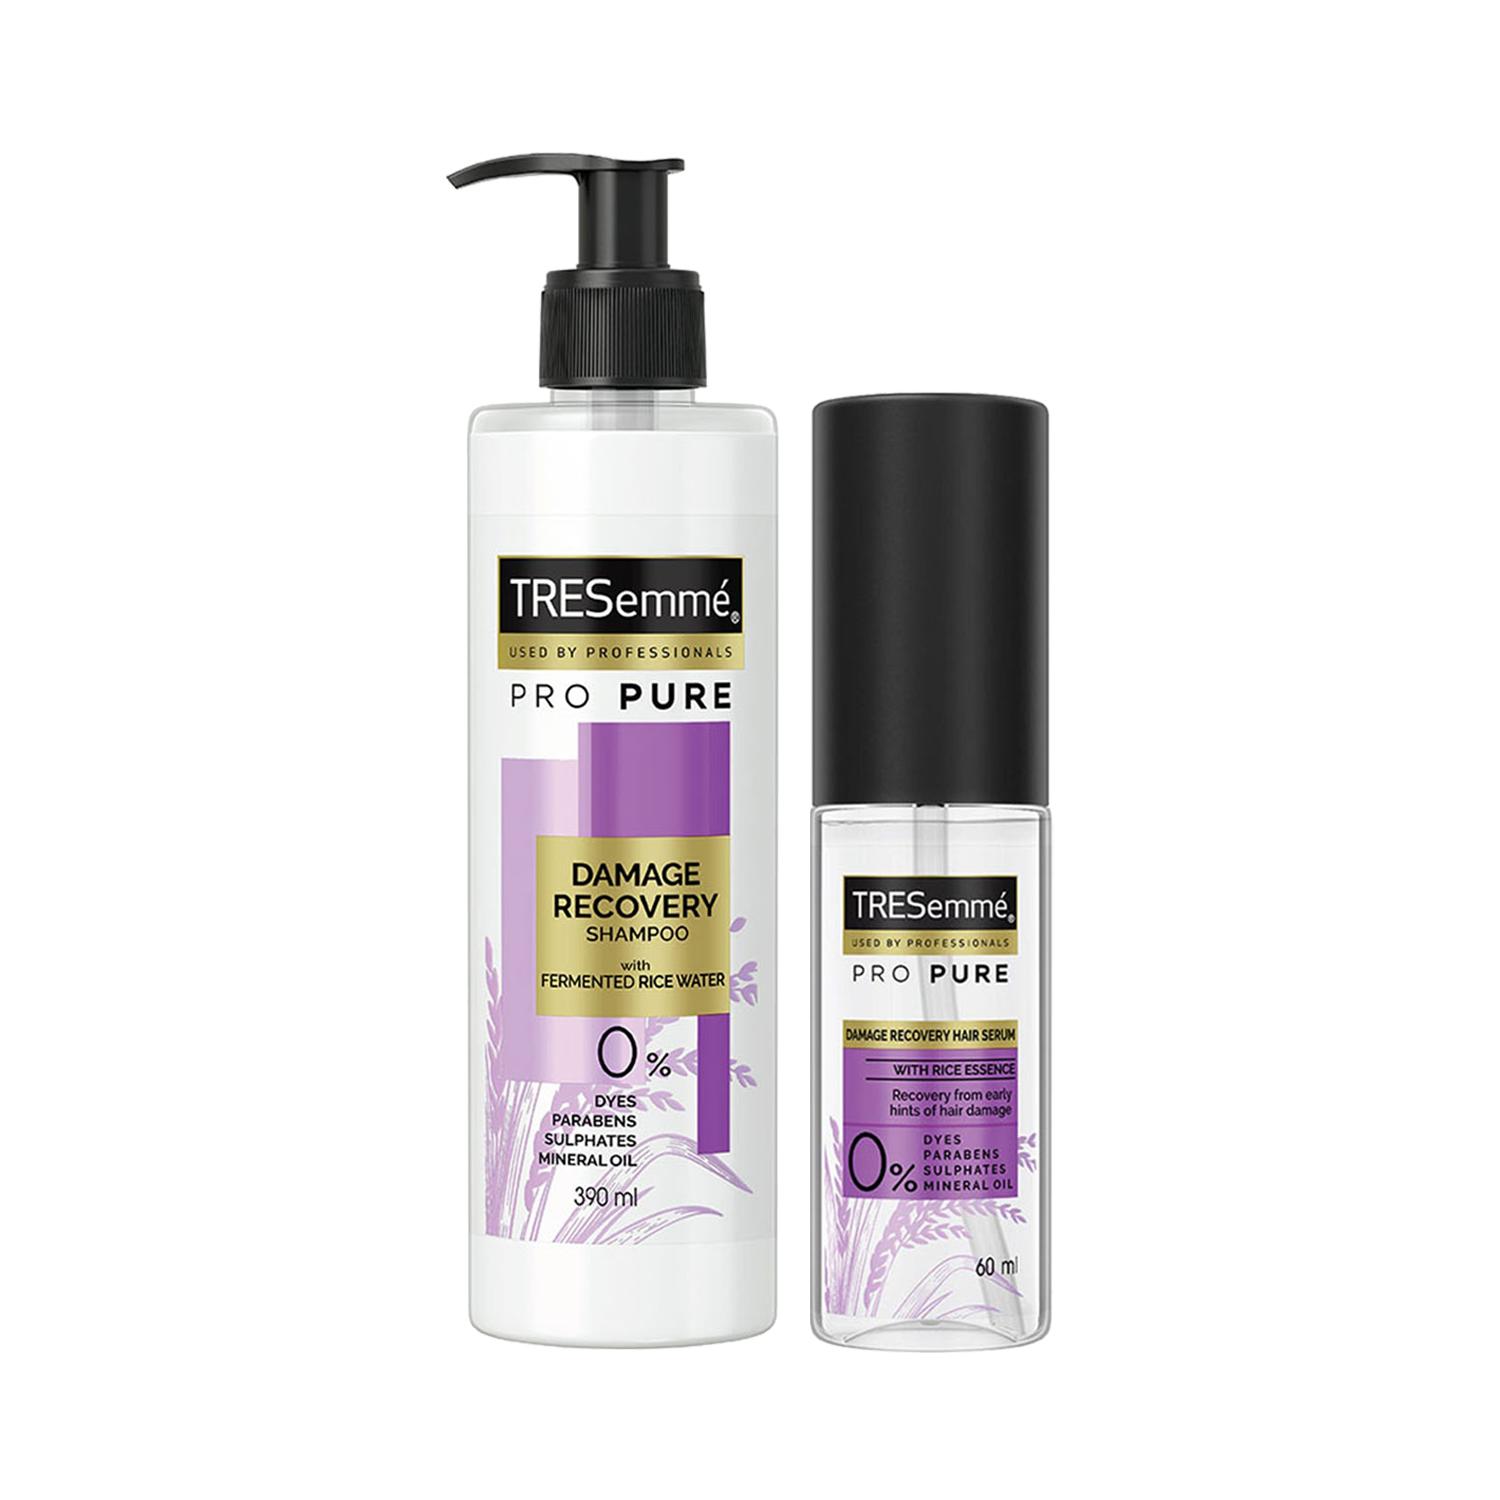 Tresemme | Tresemme Pro Pure Damage Recovery Kit With Fermented Rice Water - Shampoo + Serum Combo